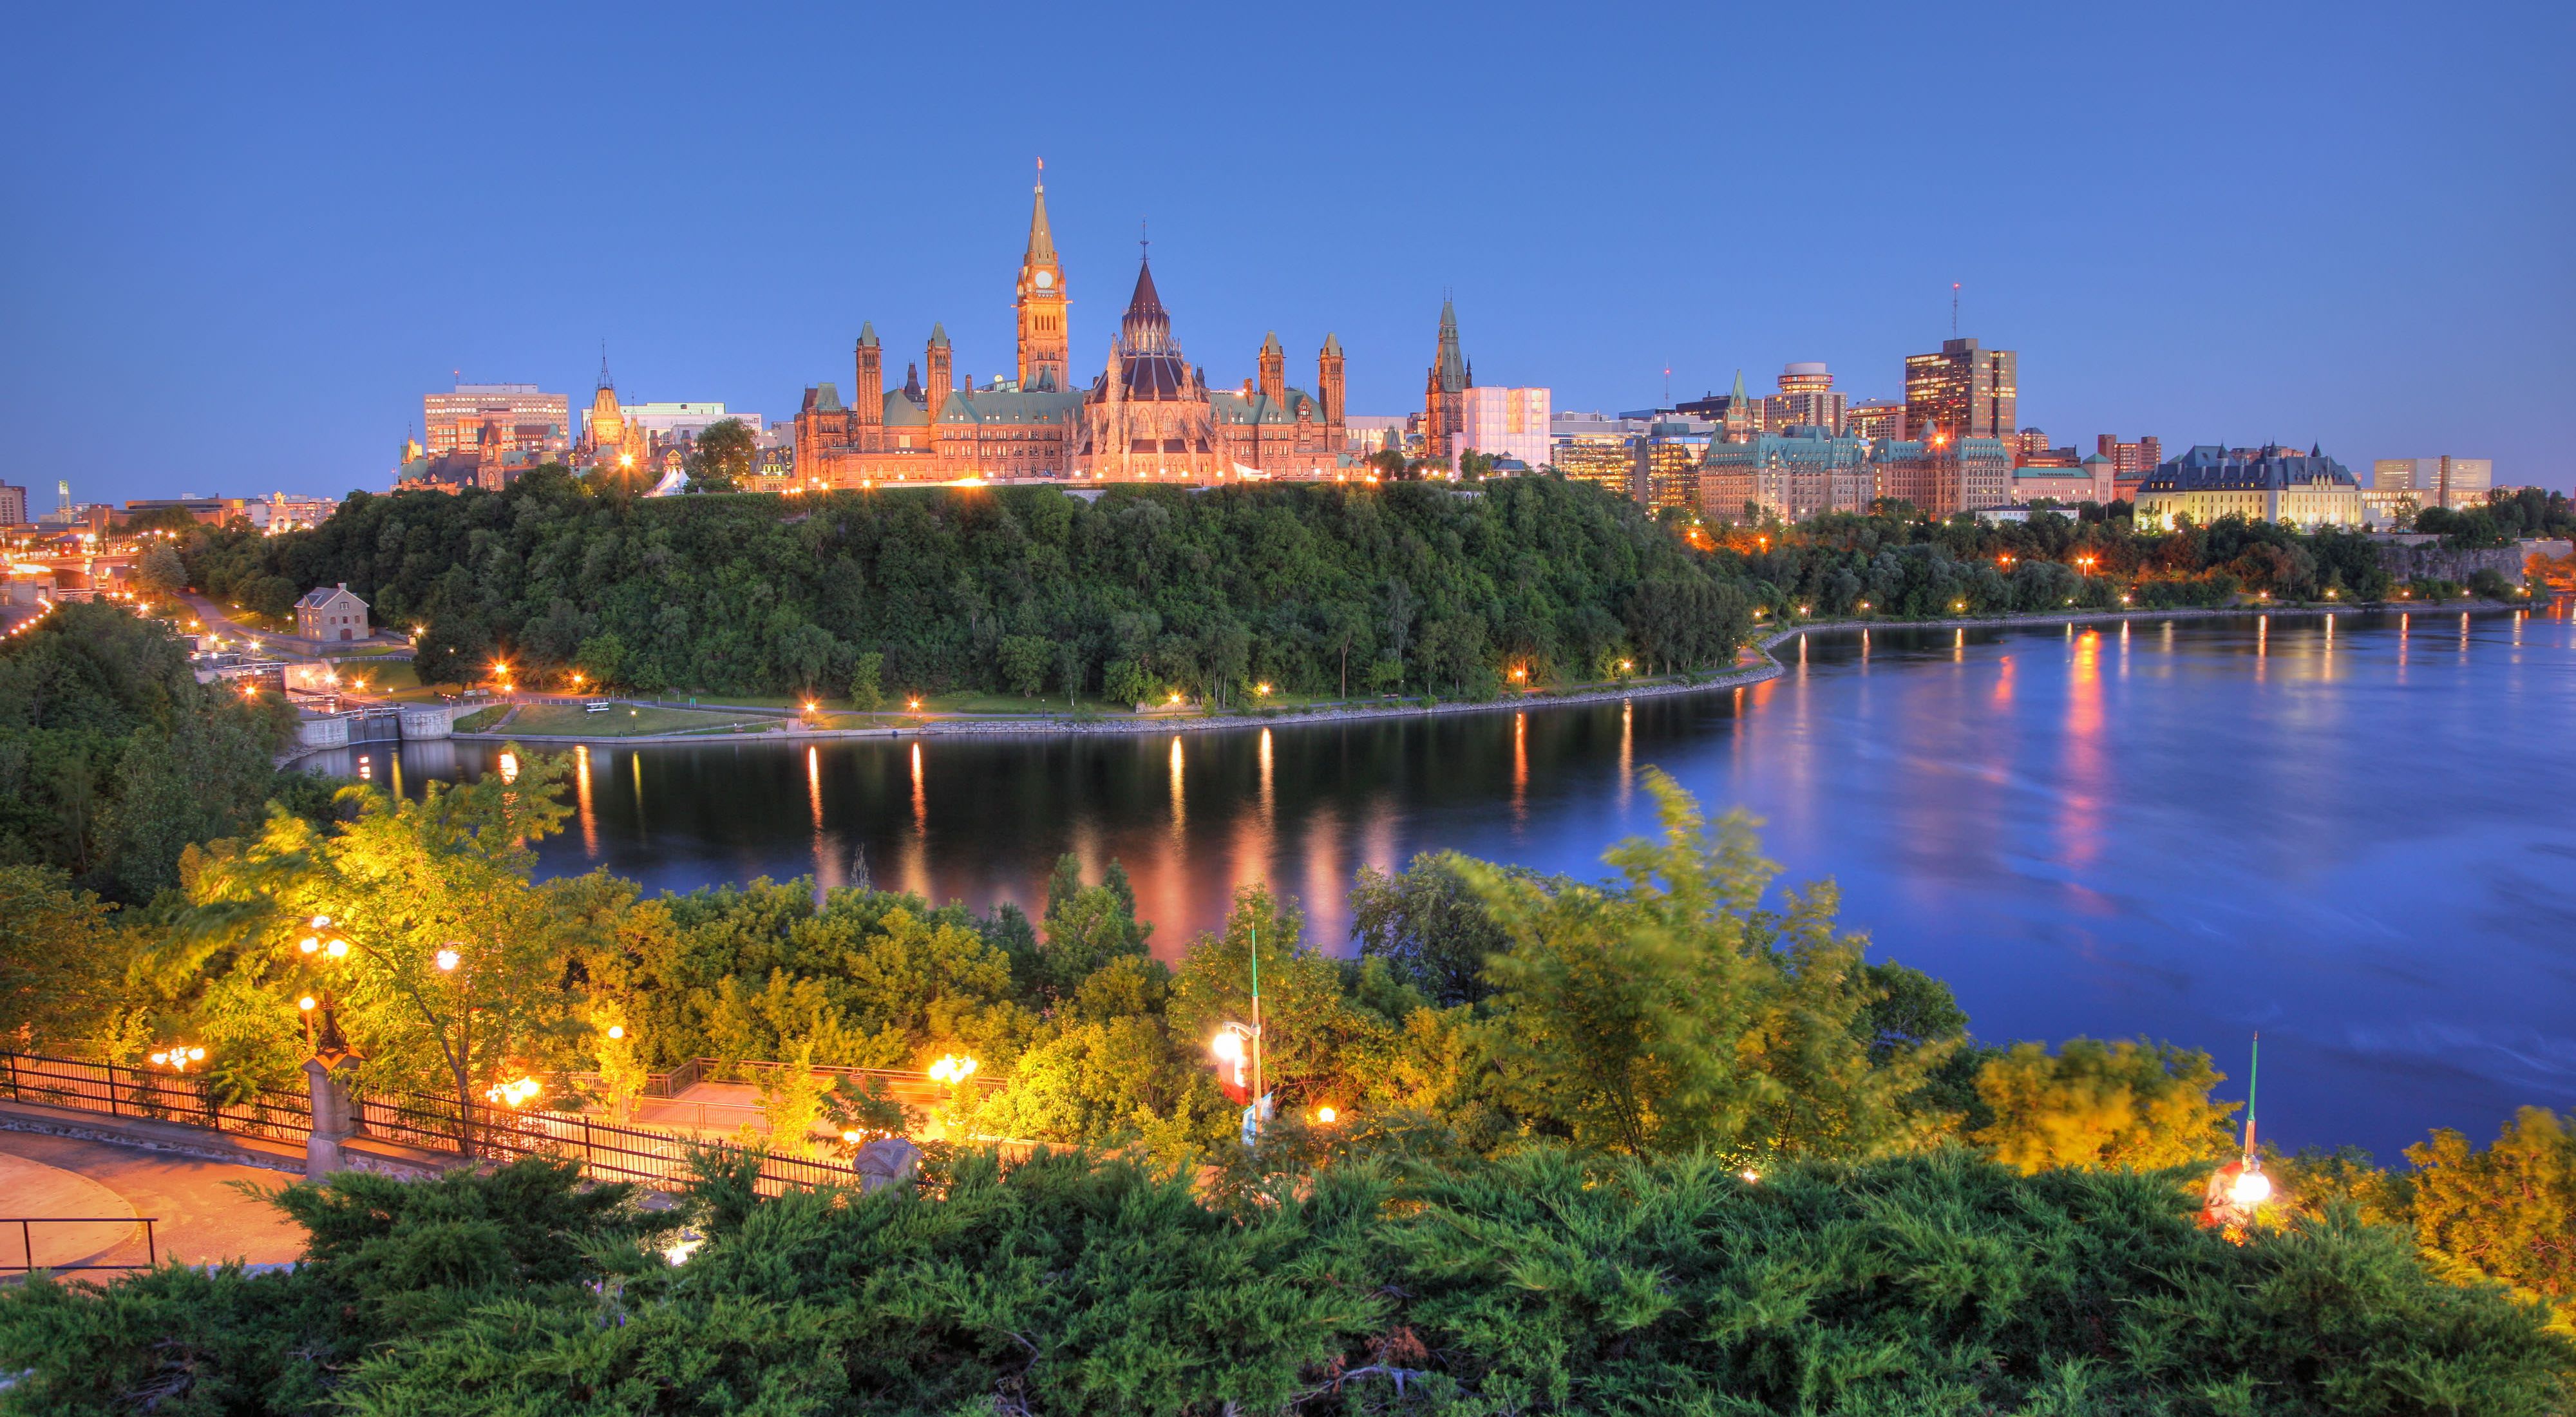 Canada's capital building lit up at night and surrounded by trees in Ottawa, Ontario.